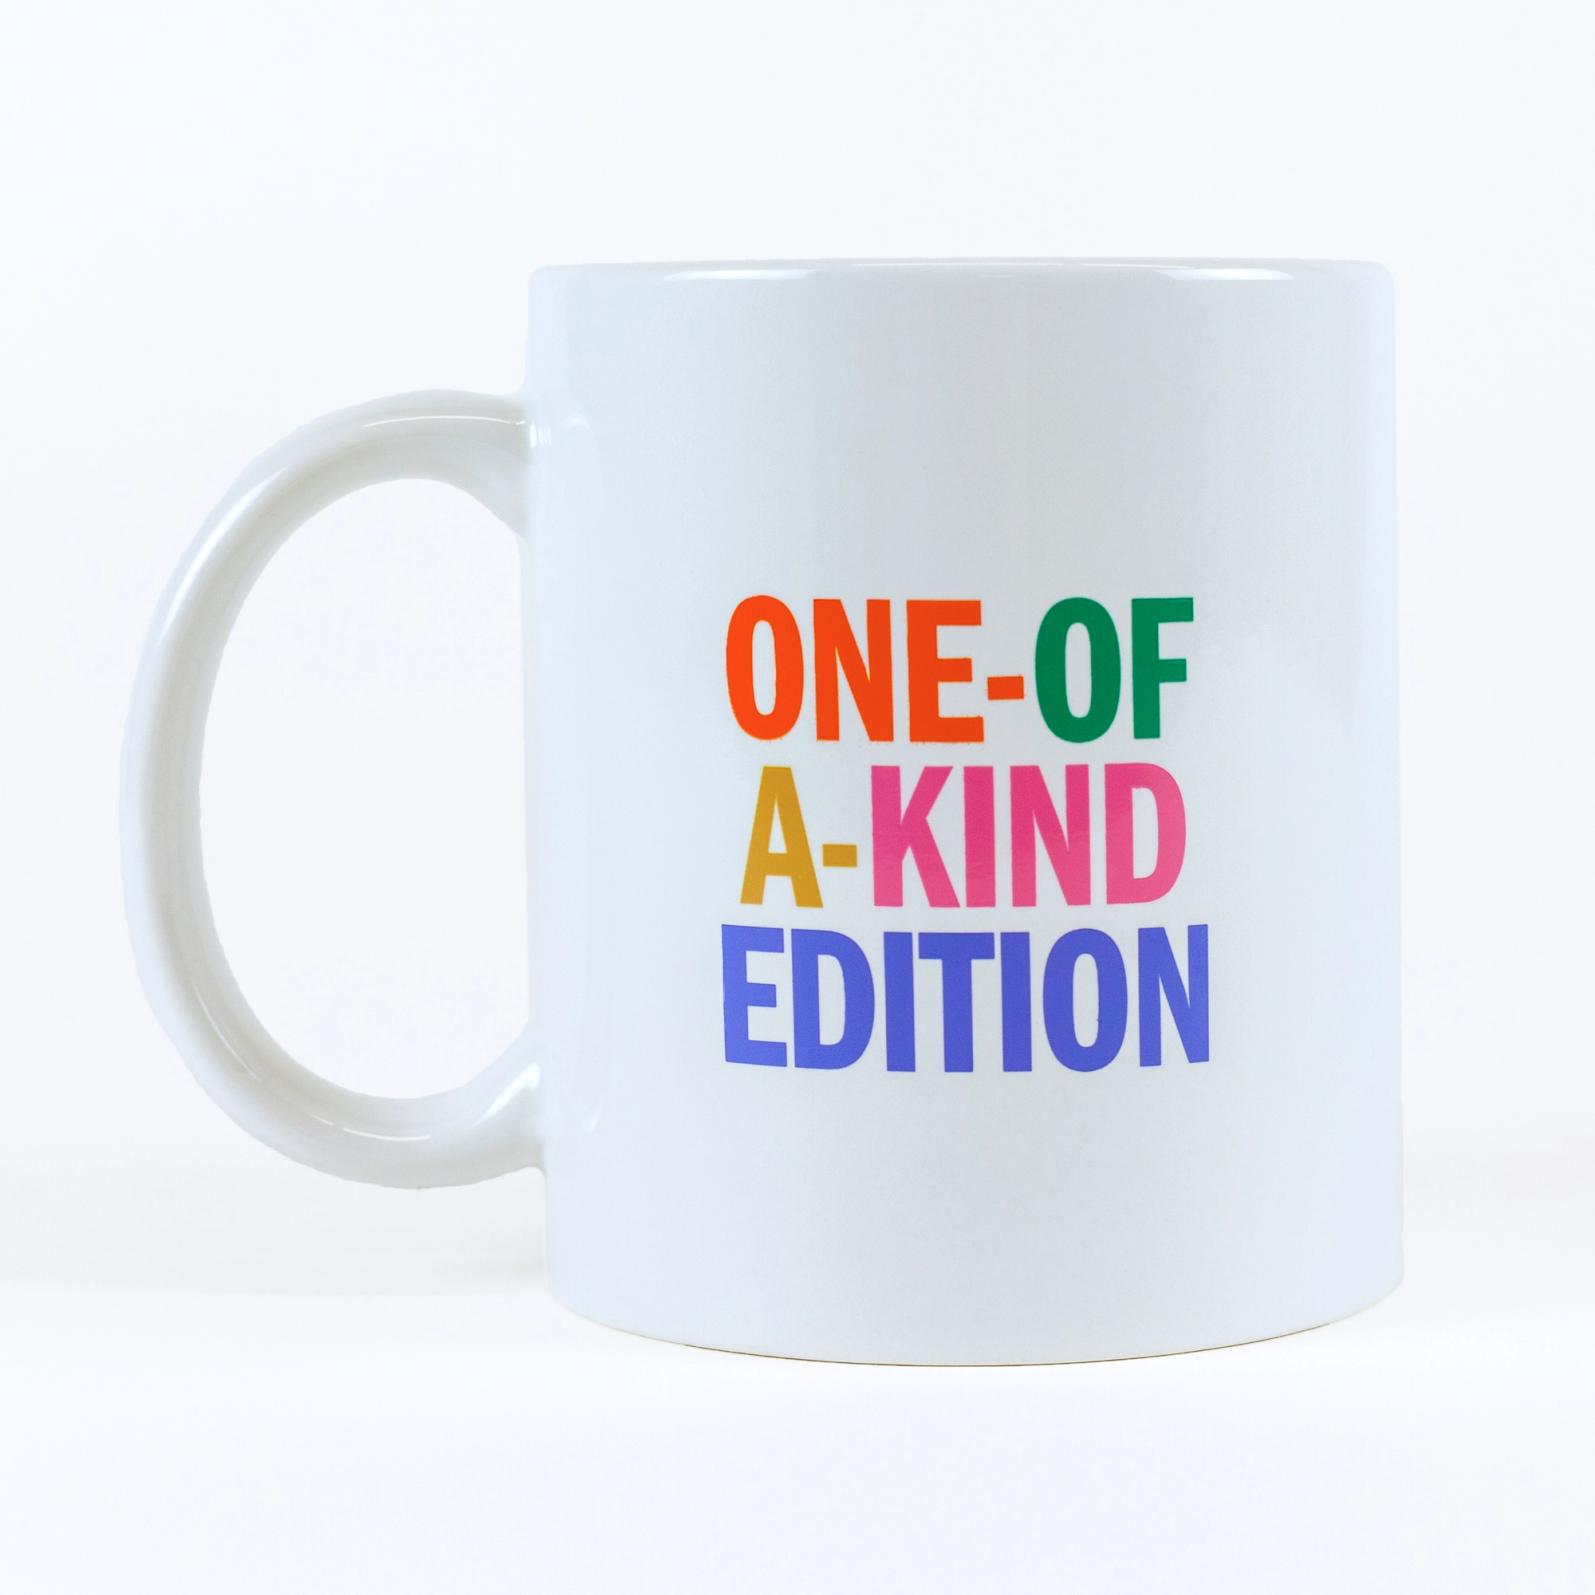 A cream colored mug against a white background that reads "ONE-OF-A-KIND EDITION". Each word is in a different color: orange, green, gold, pink and blue.